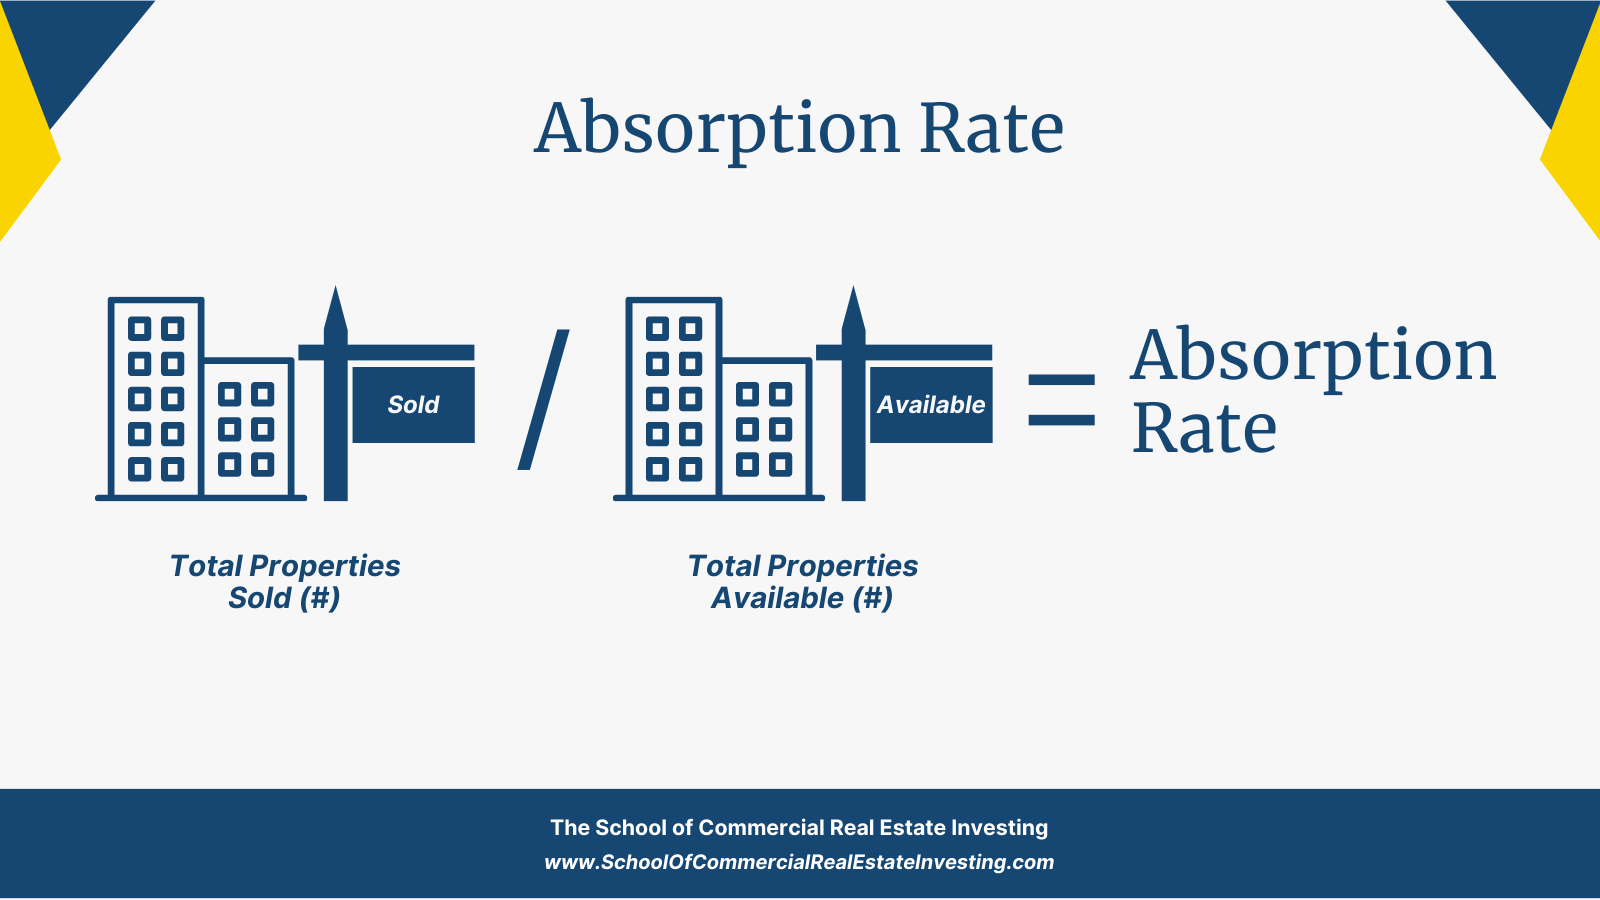 Calculate Absorption Rate by dividing the number of properties sold by the total number of available properties during a specific period.